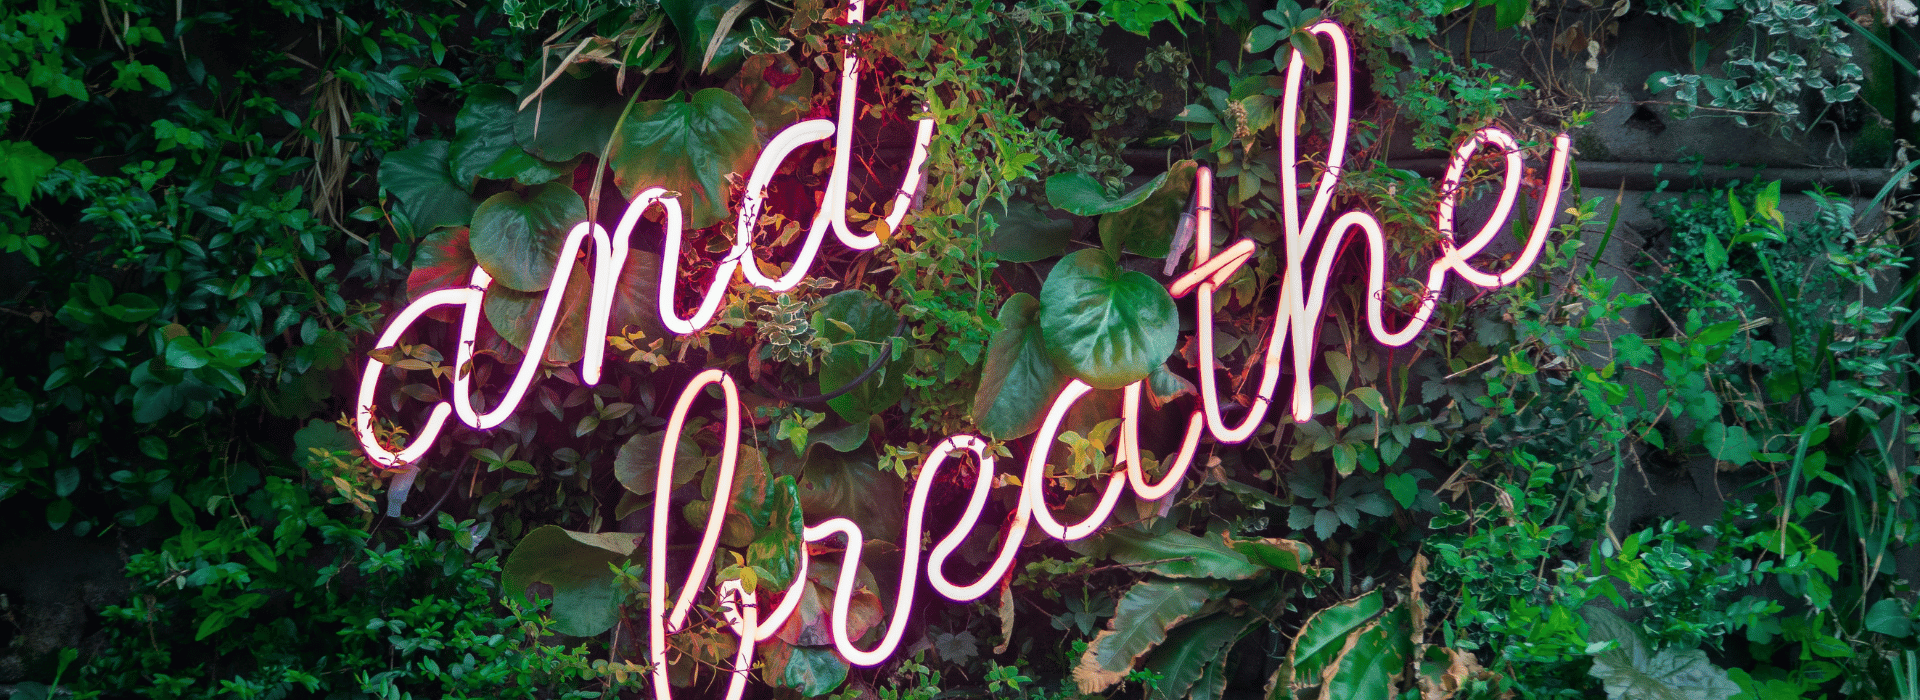 Pink neon sign which reads 'and breathe' on a wall of foliage | The Secret to Breathing Well Blog | Shine Body & Bath Chakra Soap | Blog